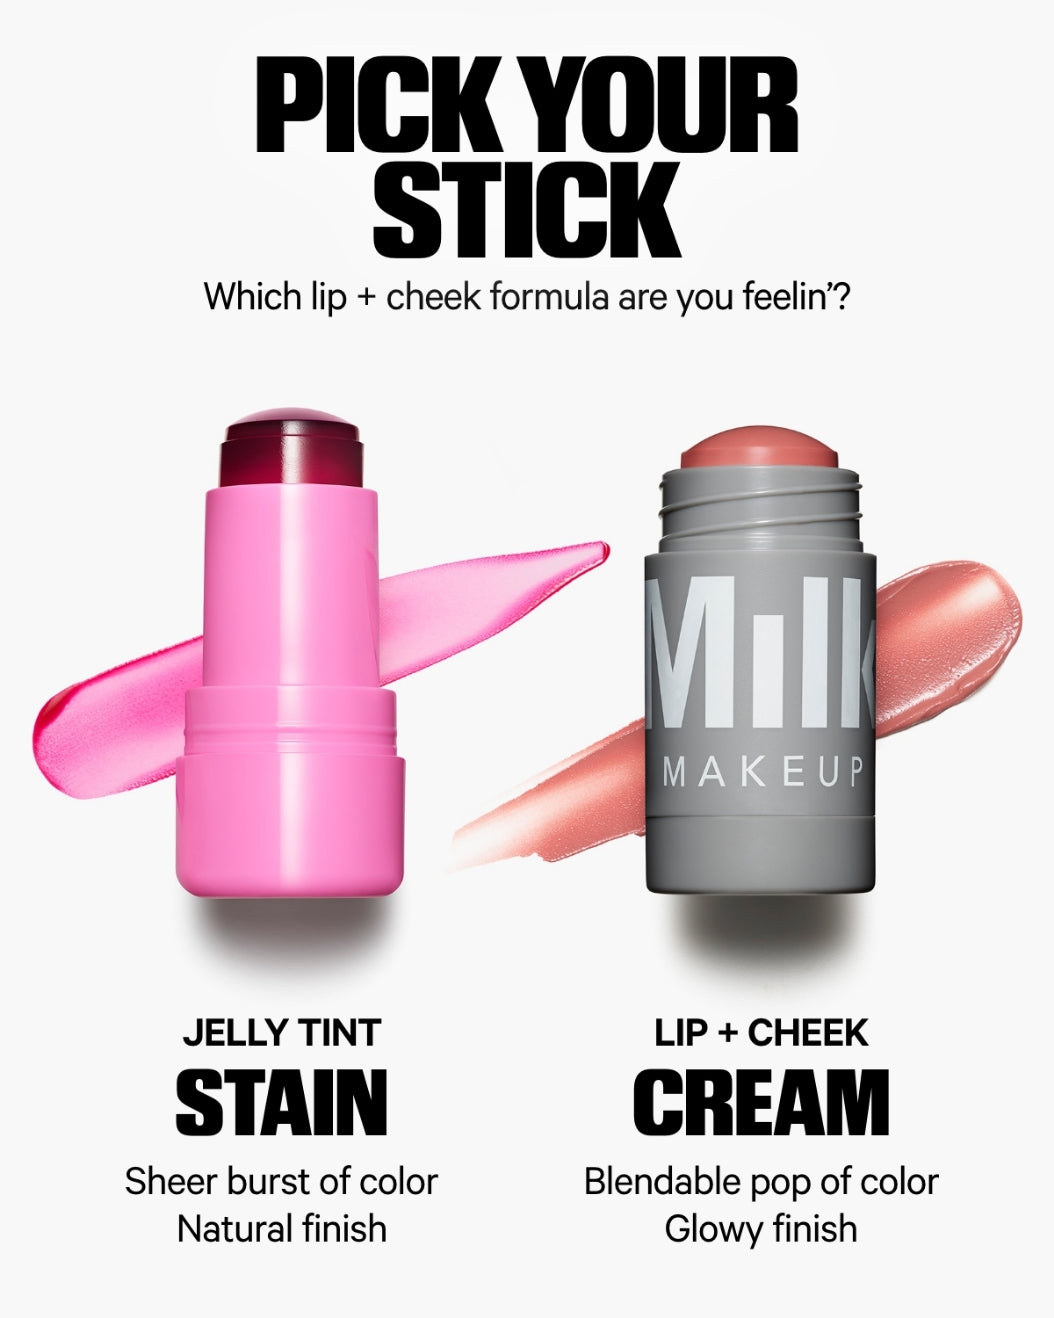 Side-by-side comparison of Milk Makeup's Cooling Water Jelly Tint and Lip + Cheek on a white background